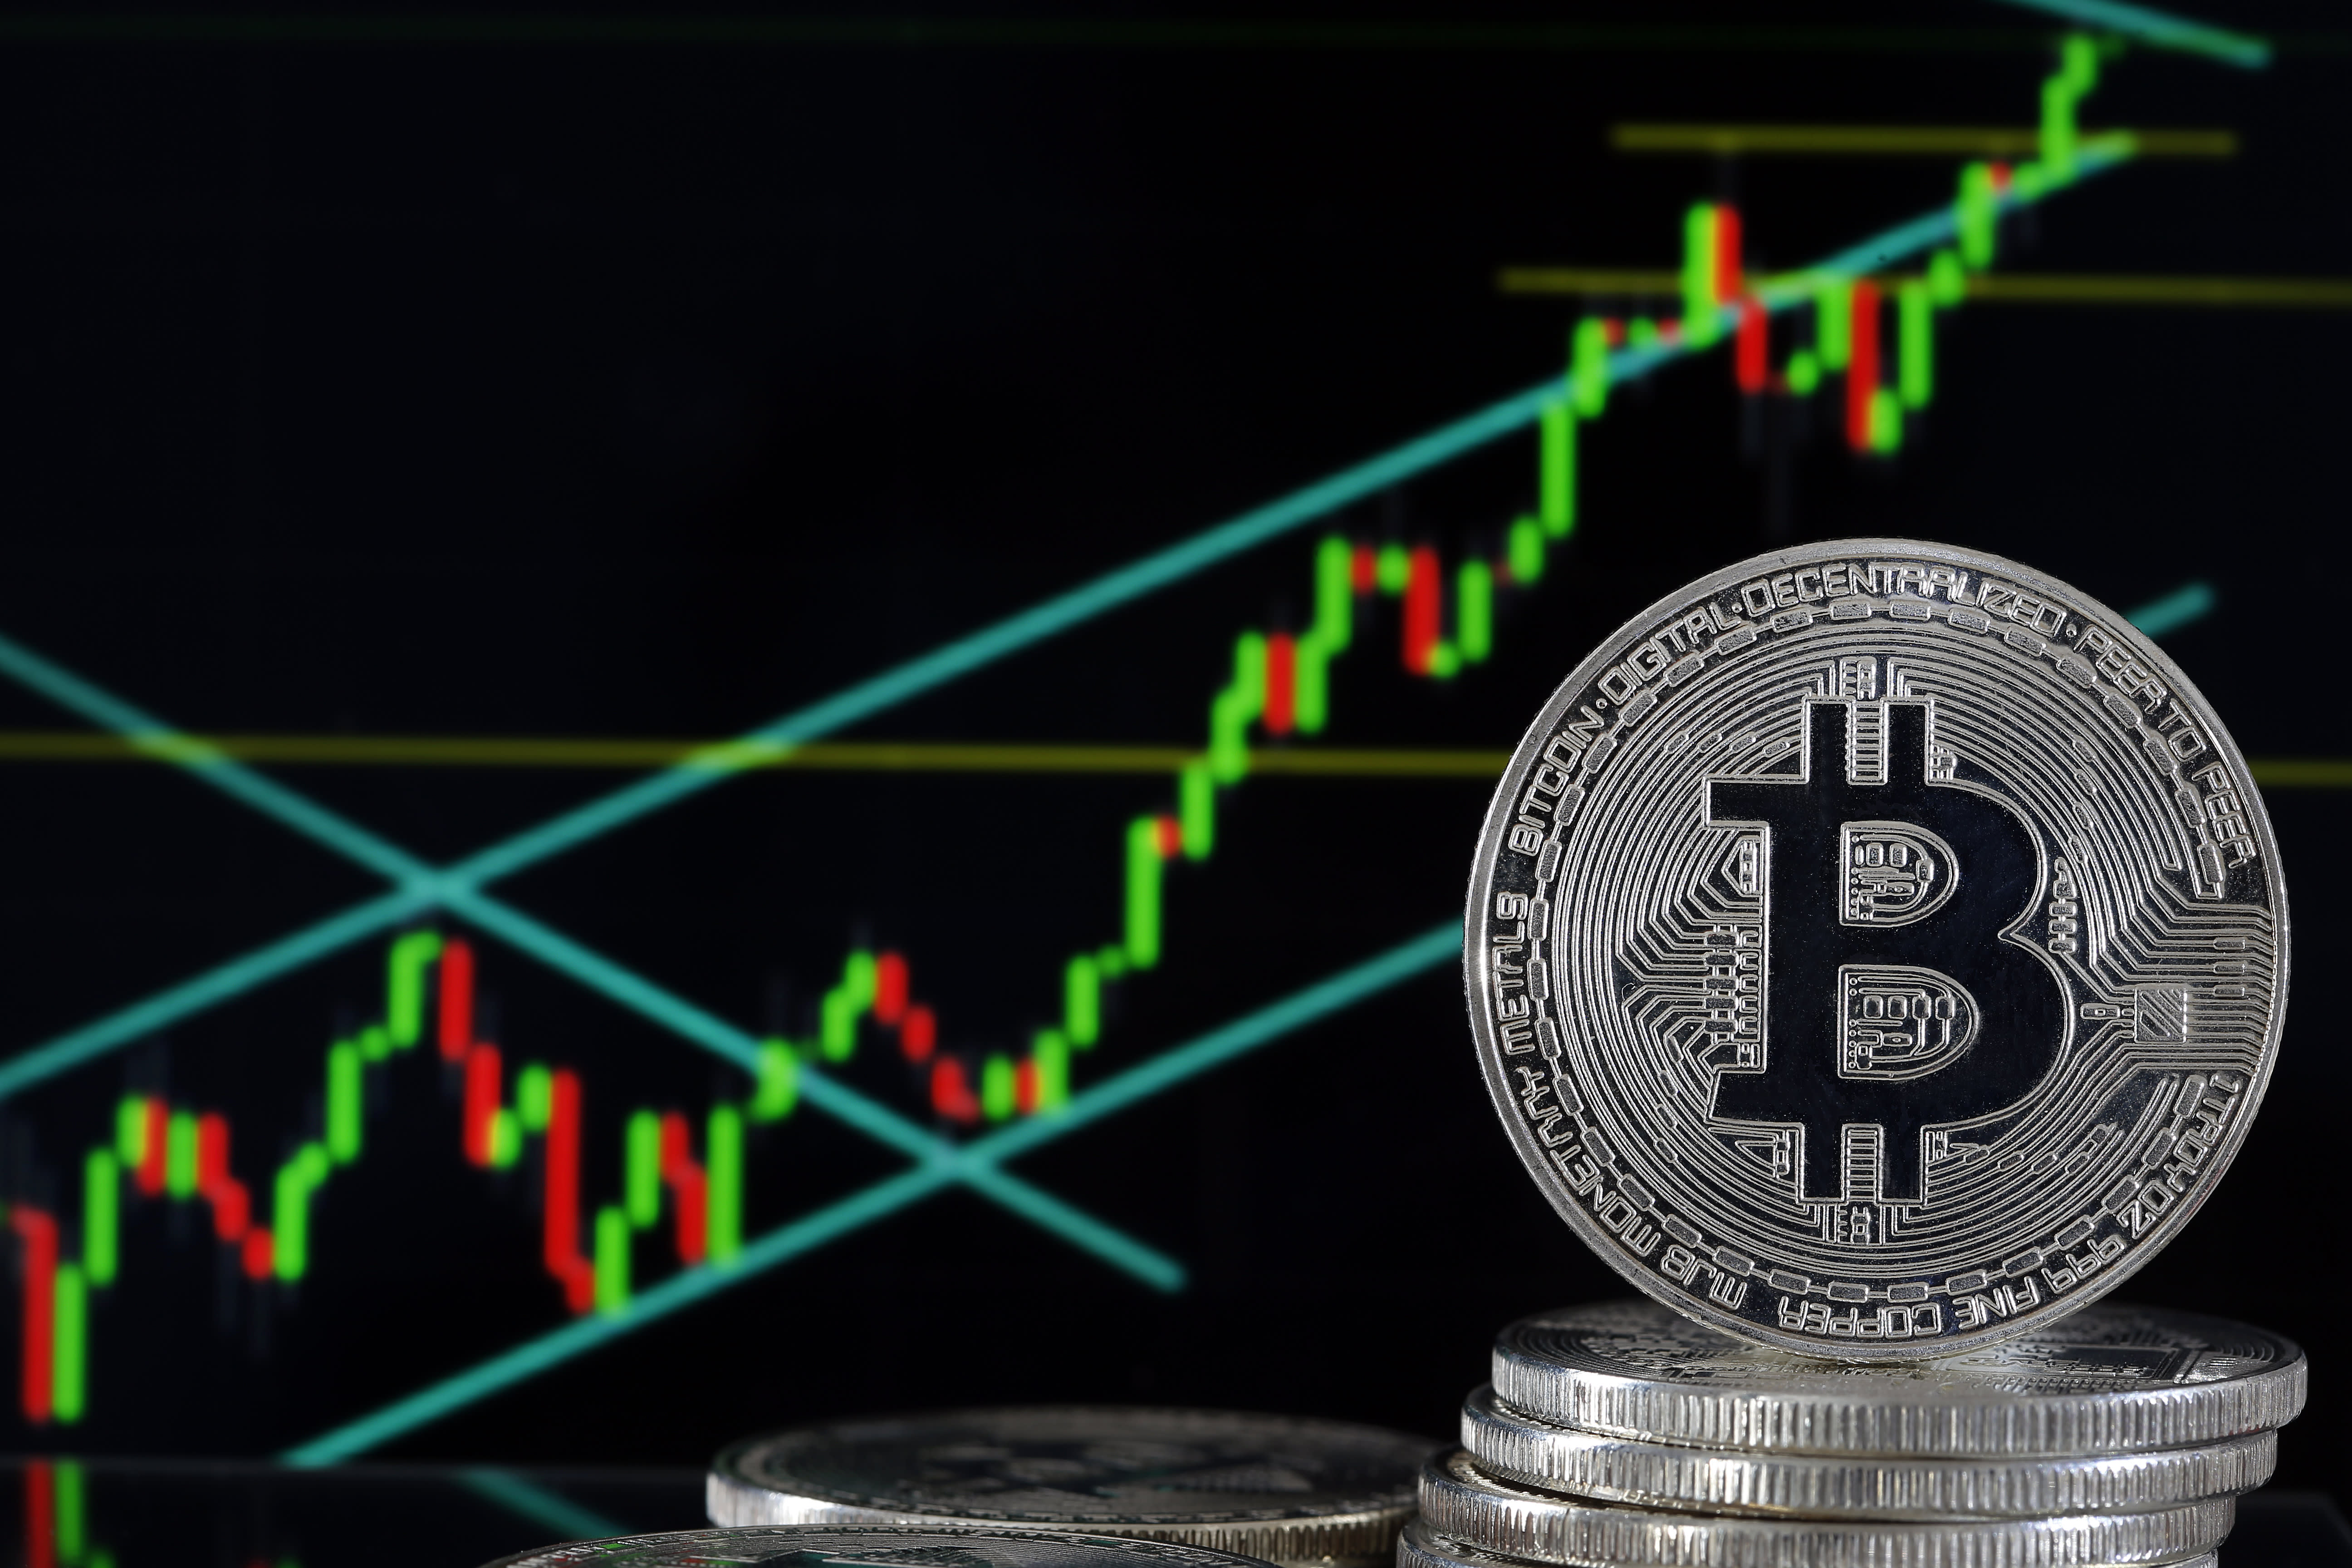 Bitcoin (BTC) is jumping above $ 10,000 for the first time since June